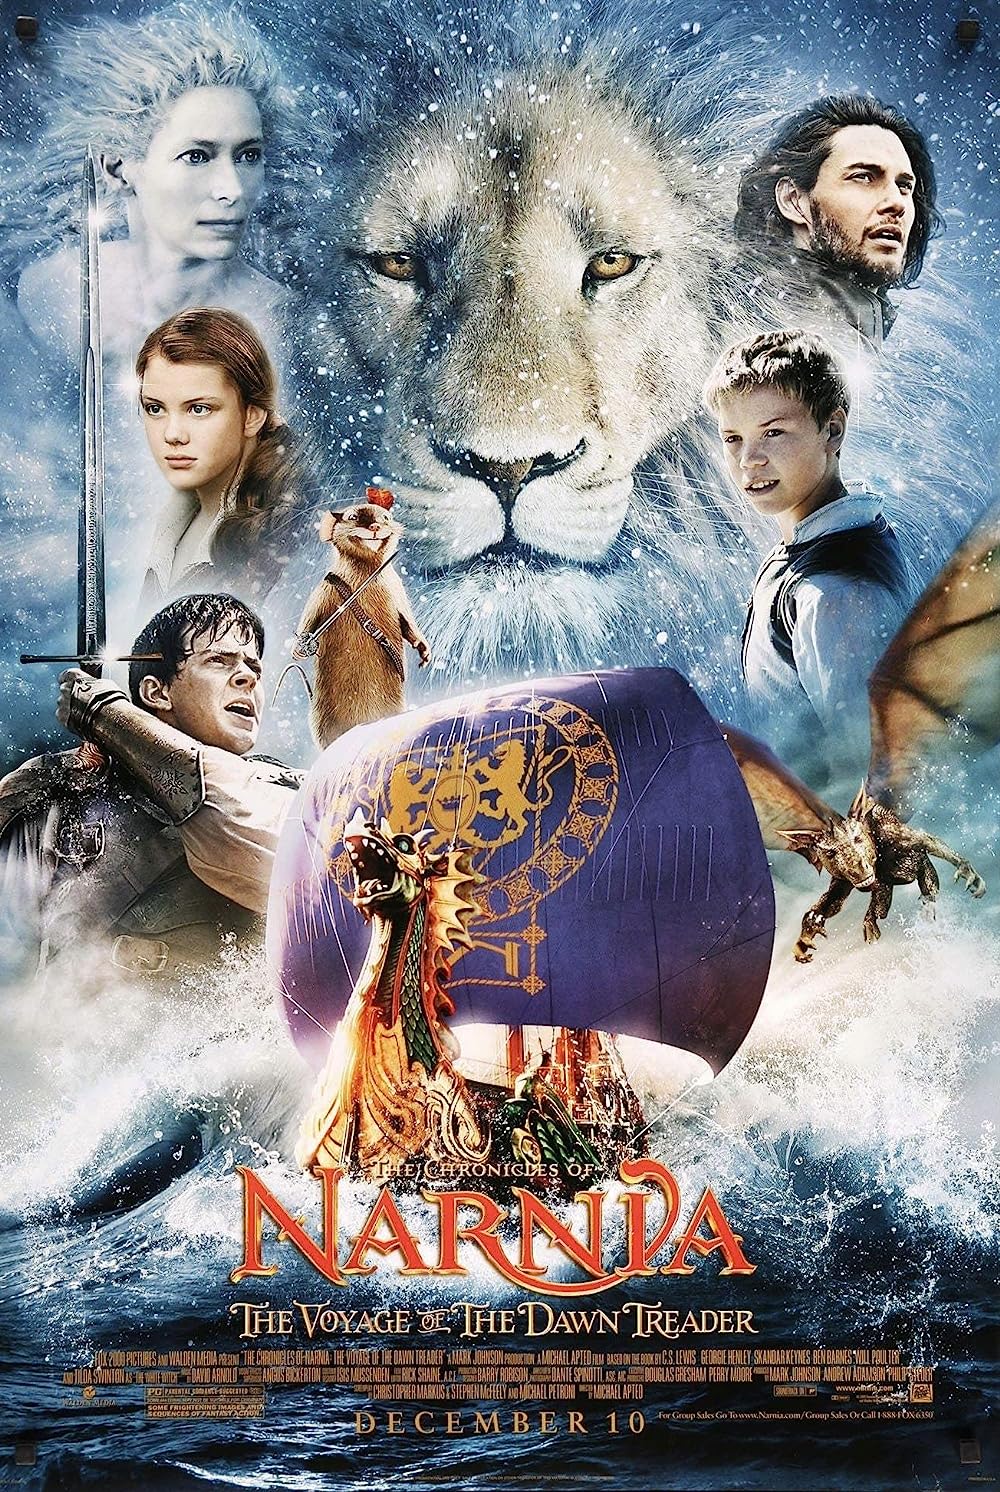 The Chronicles of Narnia The Voyage of the Dawn Treader 2010 Hindi Dual Audio 400MB BluRay 480p ESub Download